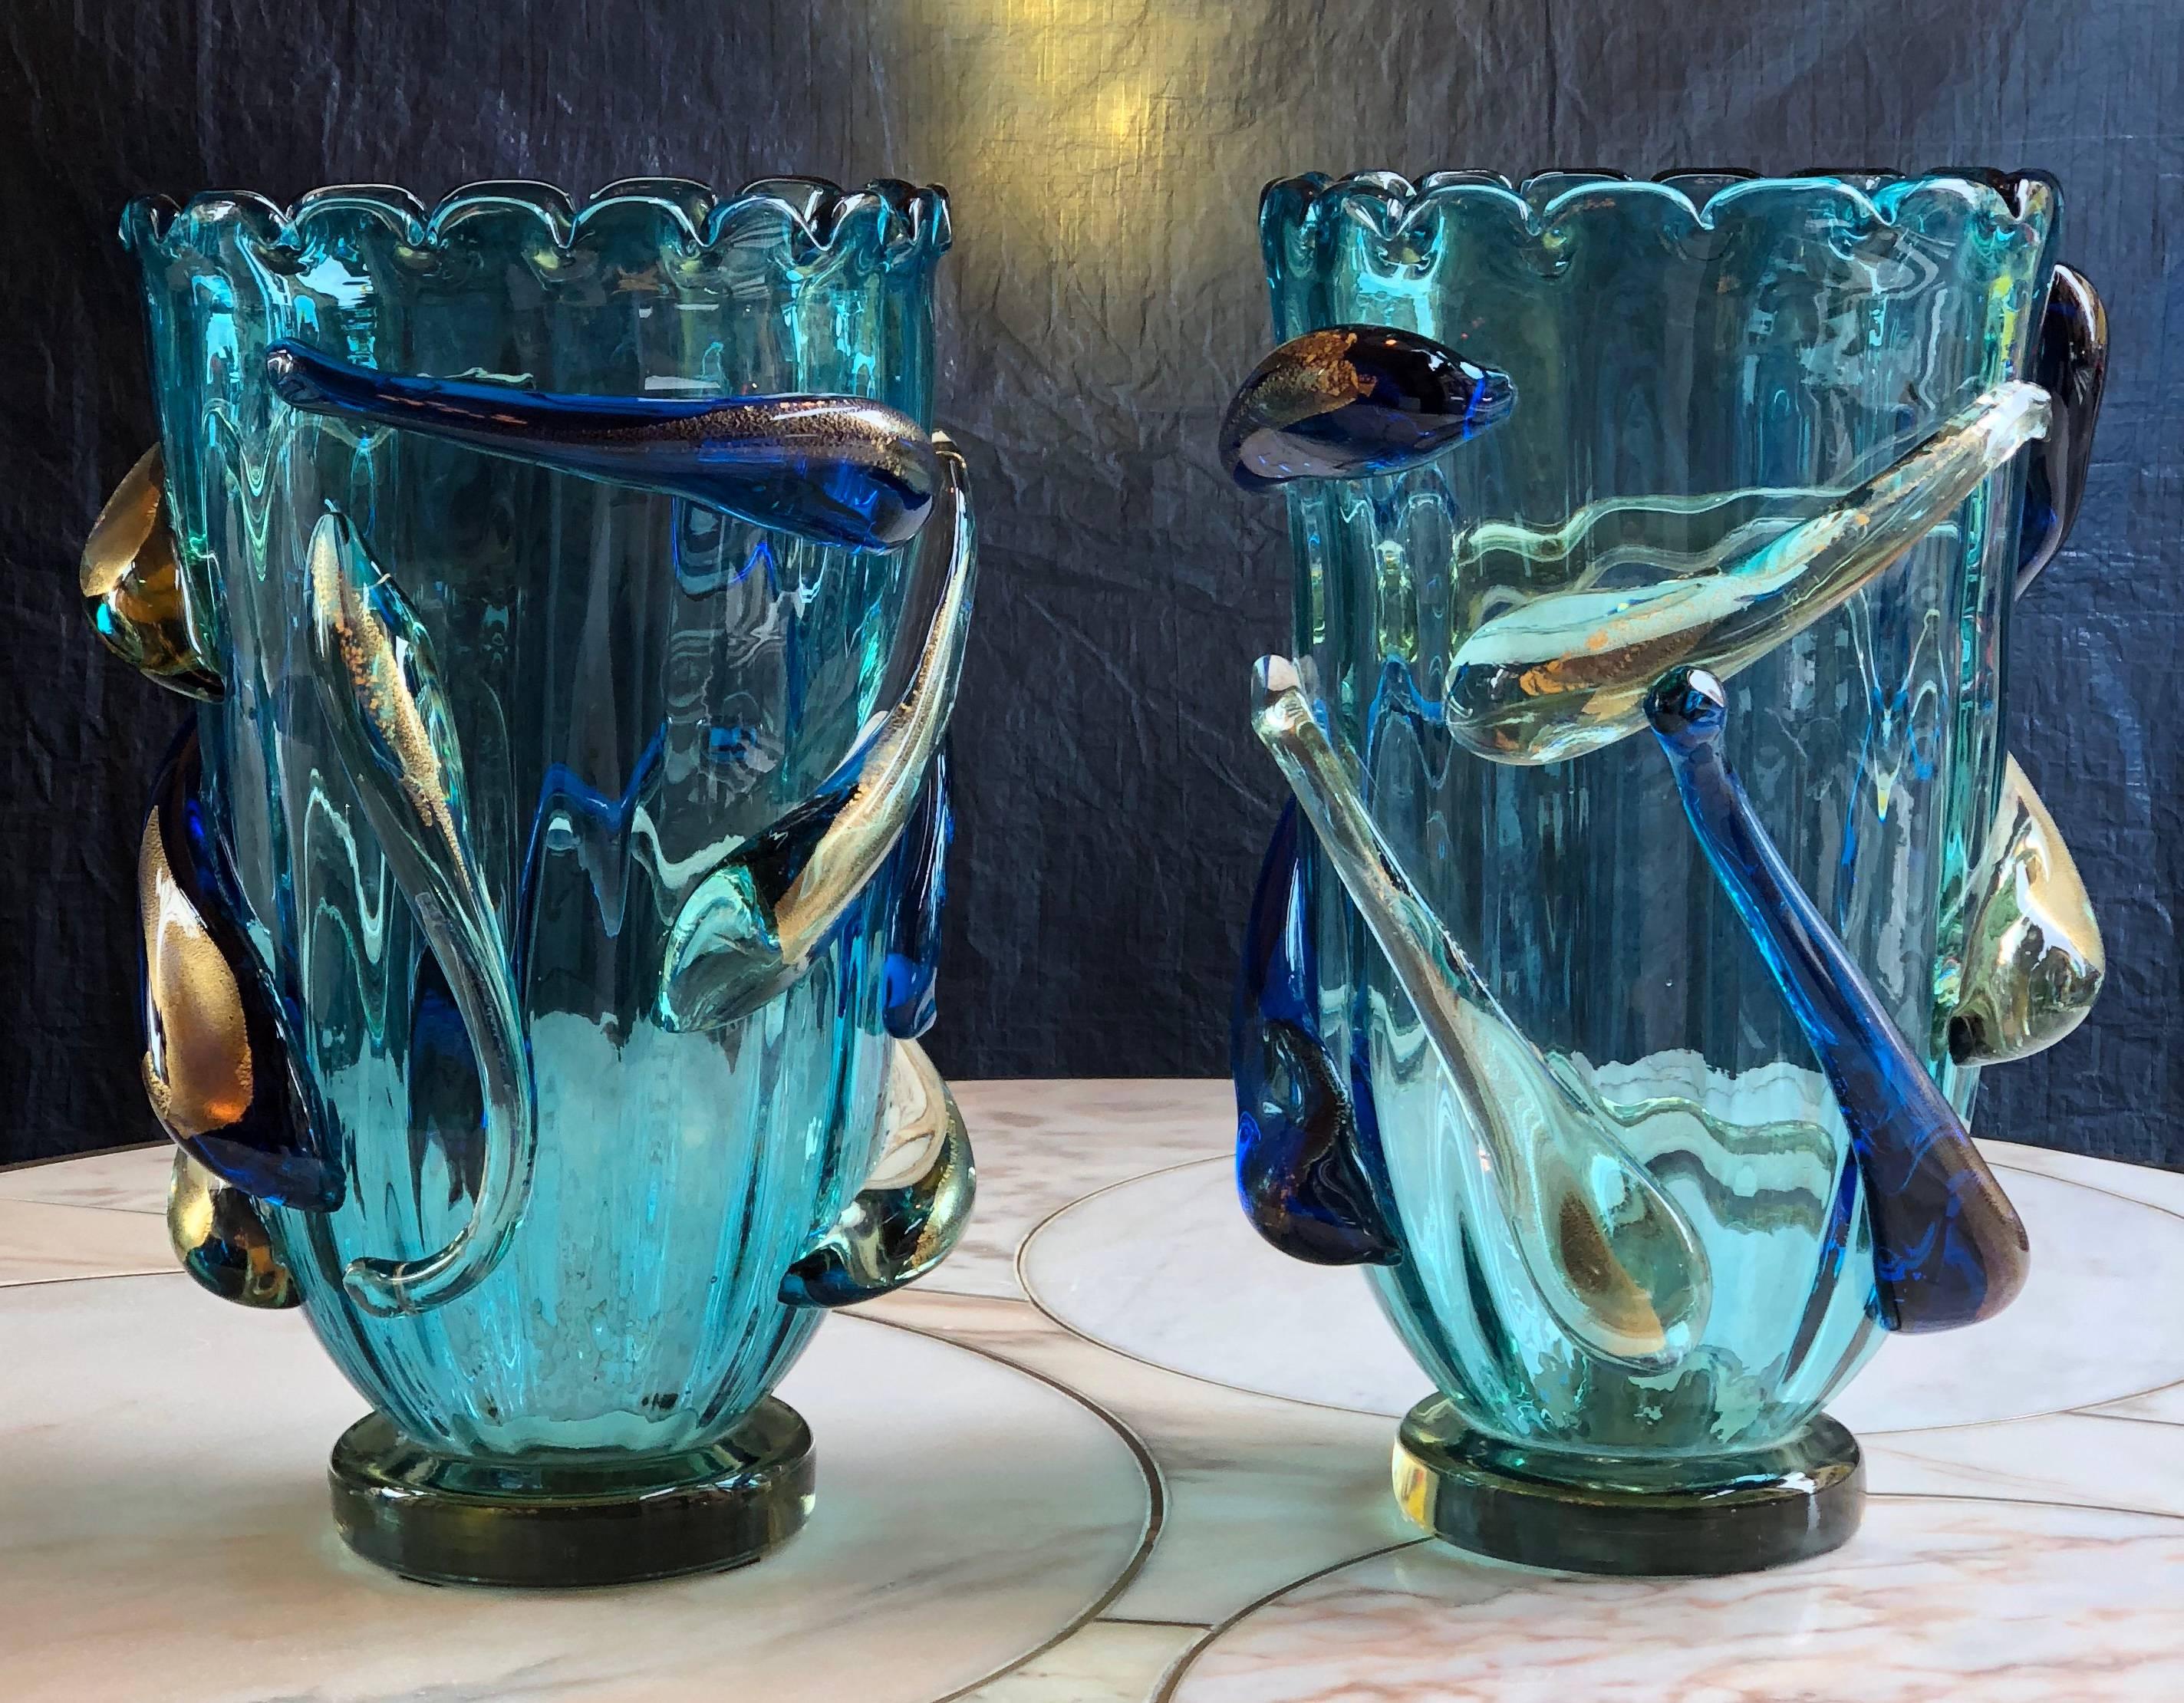 Late 20th century pair of turquoise blue and gold Murano glass vases. Signed in the bottom by Costantini.